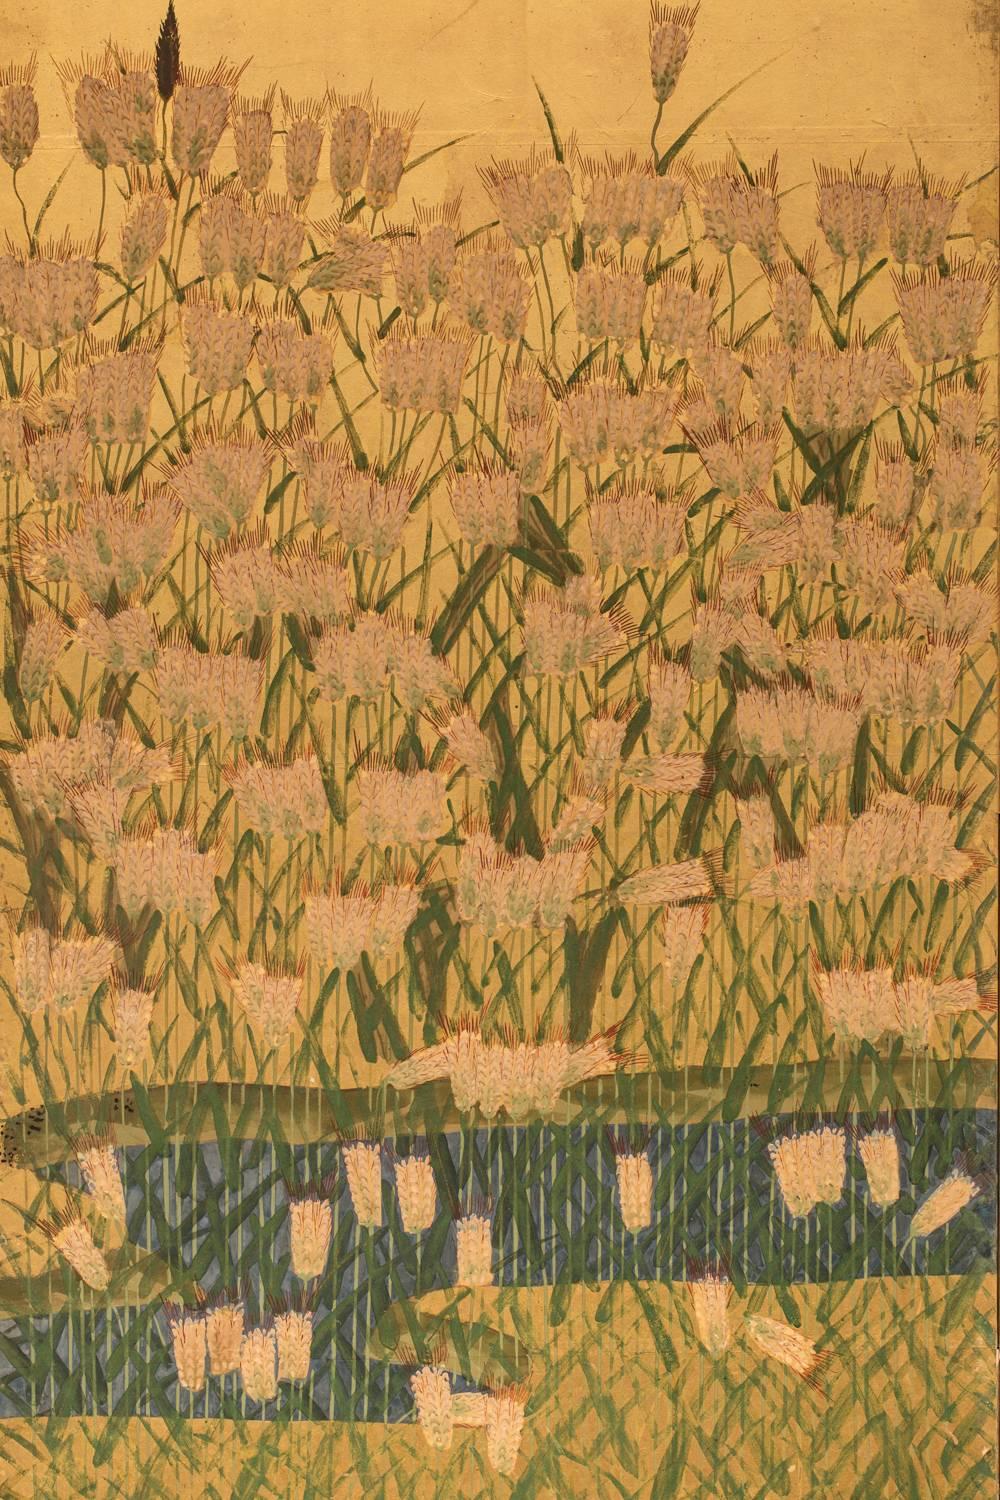 Japanese Six-Panel Screen: Field of Wheat by River's Edge 1